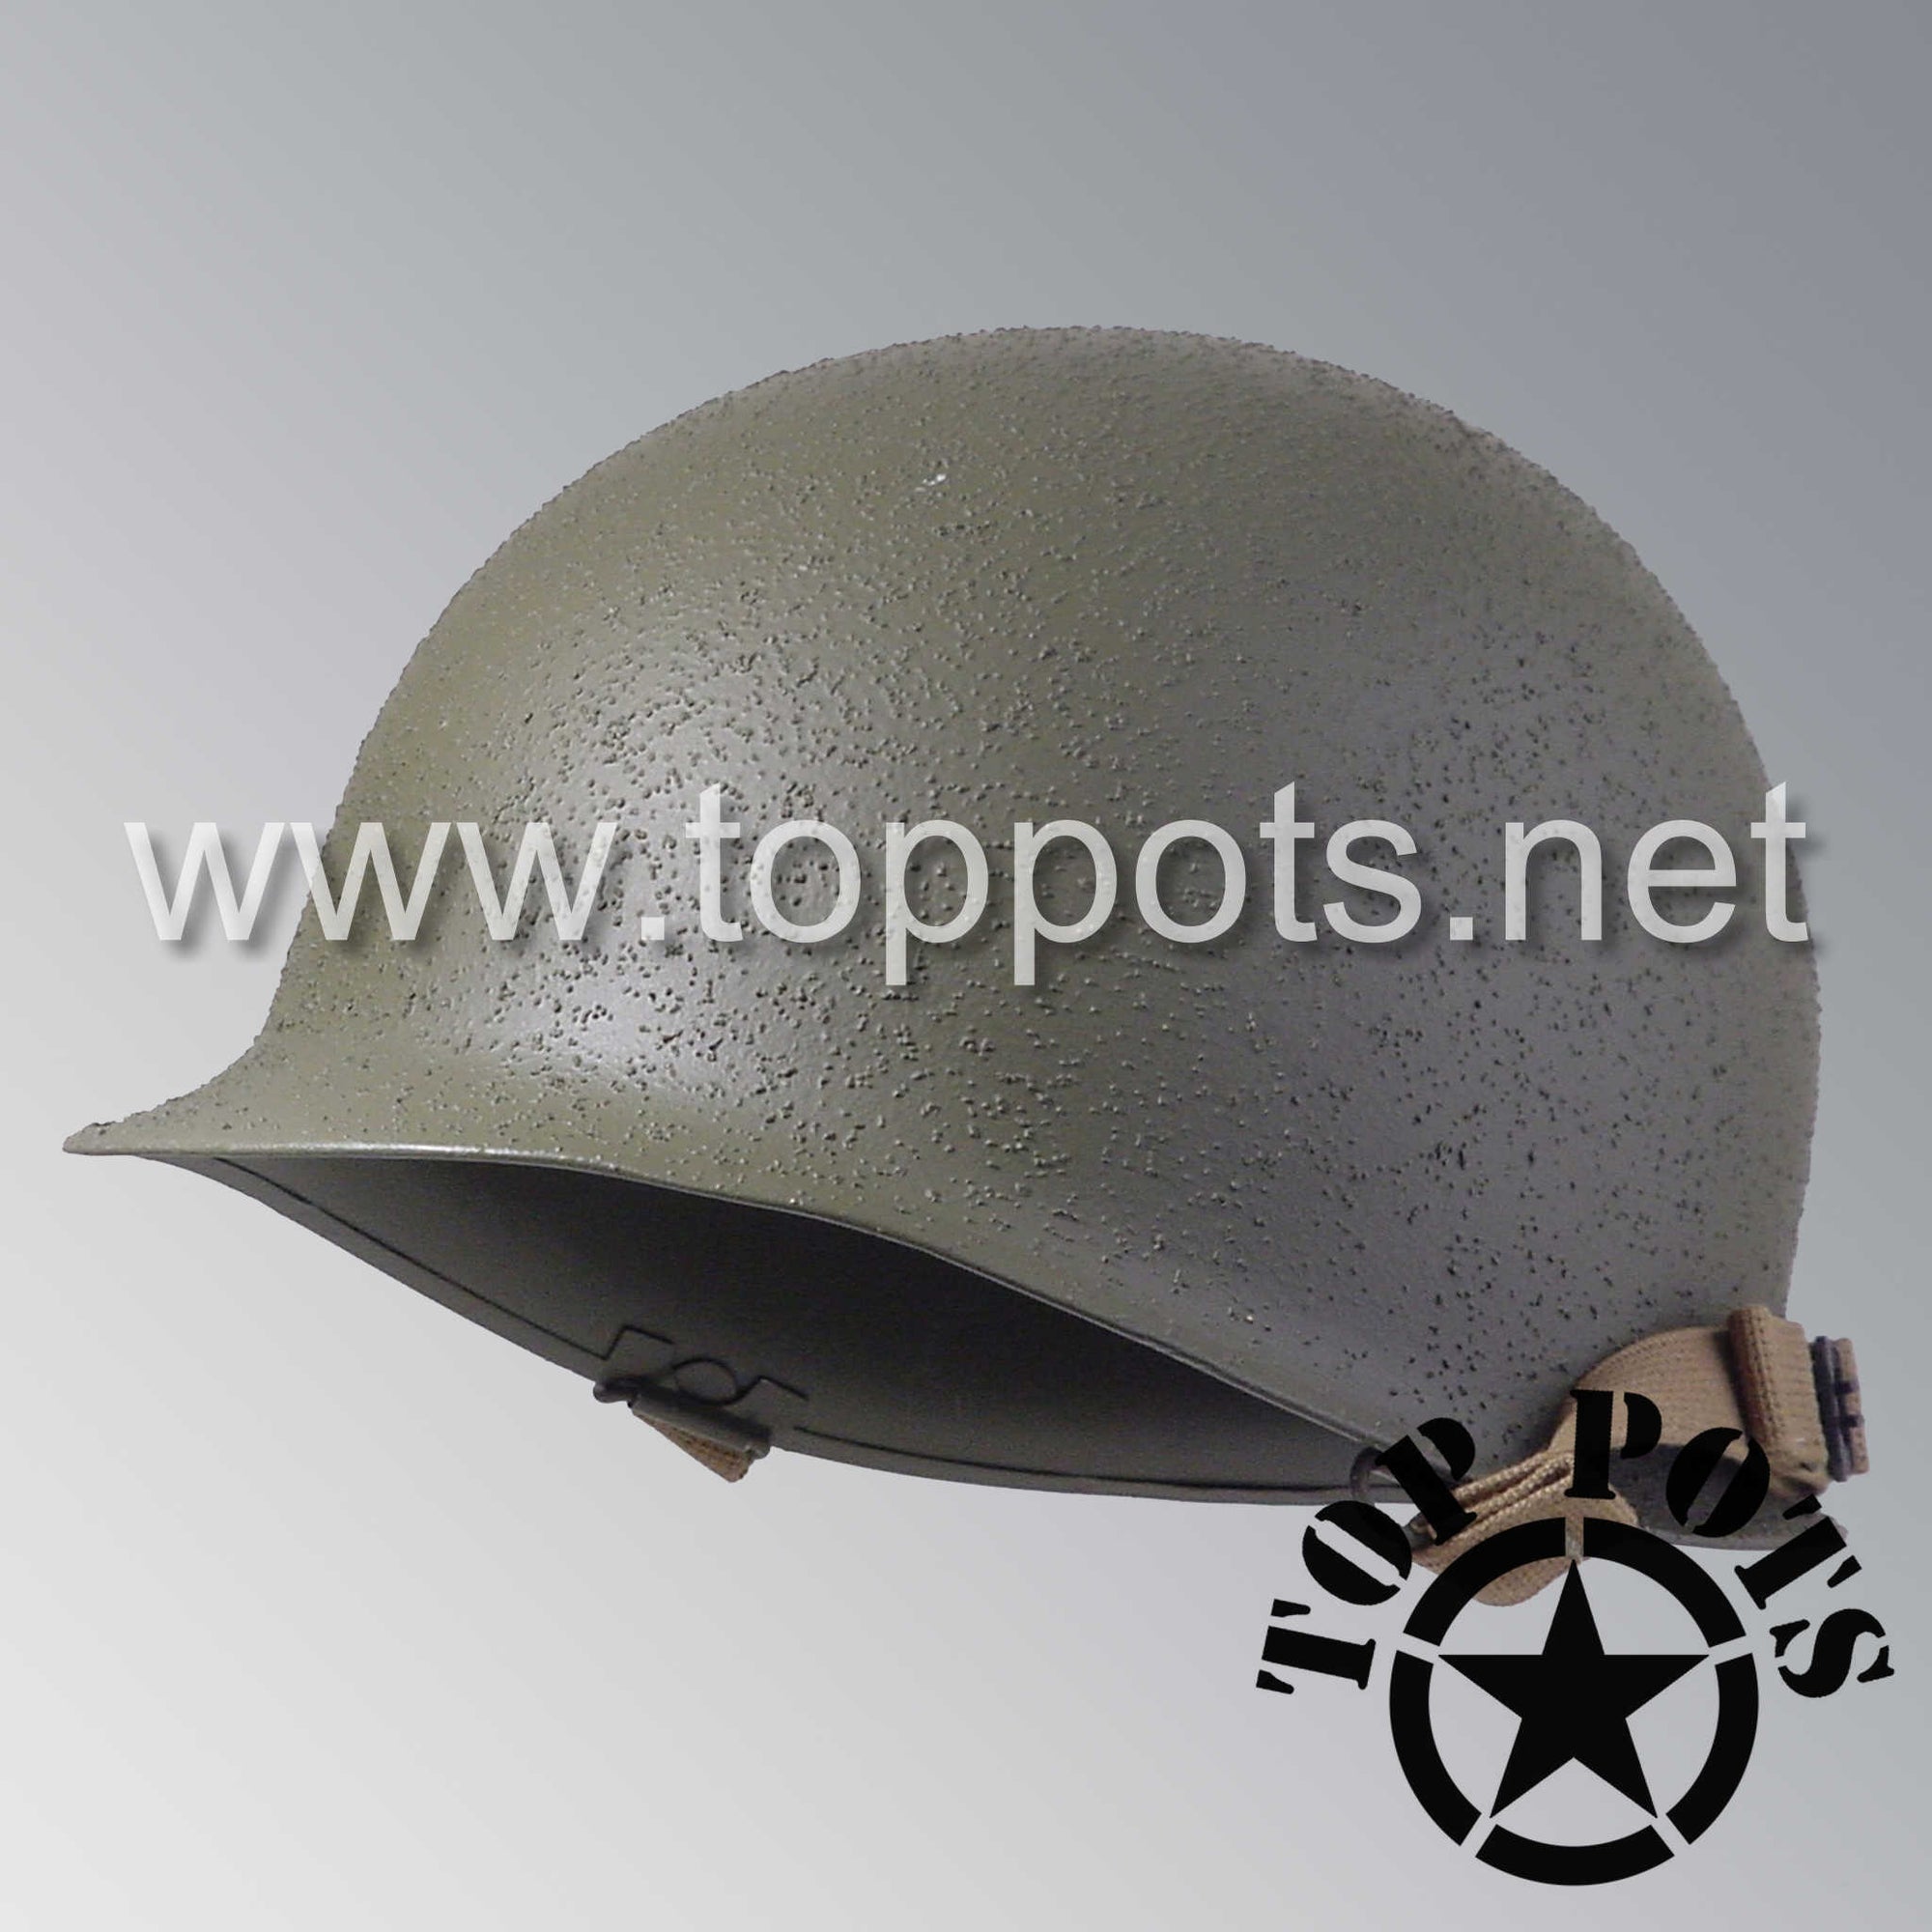 WWII US Army Restored Original M1 Infantry Helmet Swivel Bale McCord Shell with Chinstraps